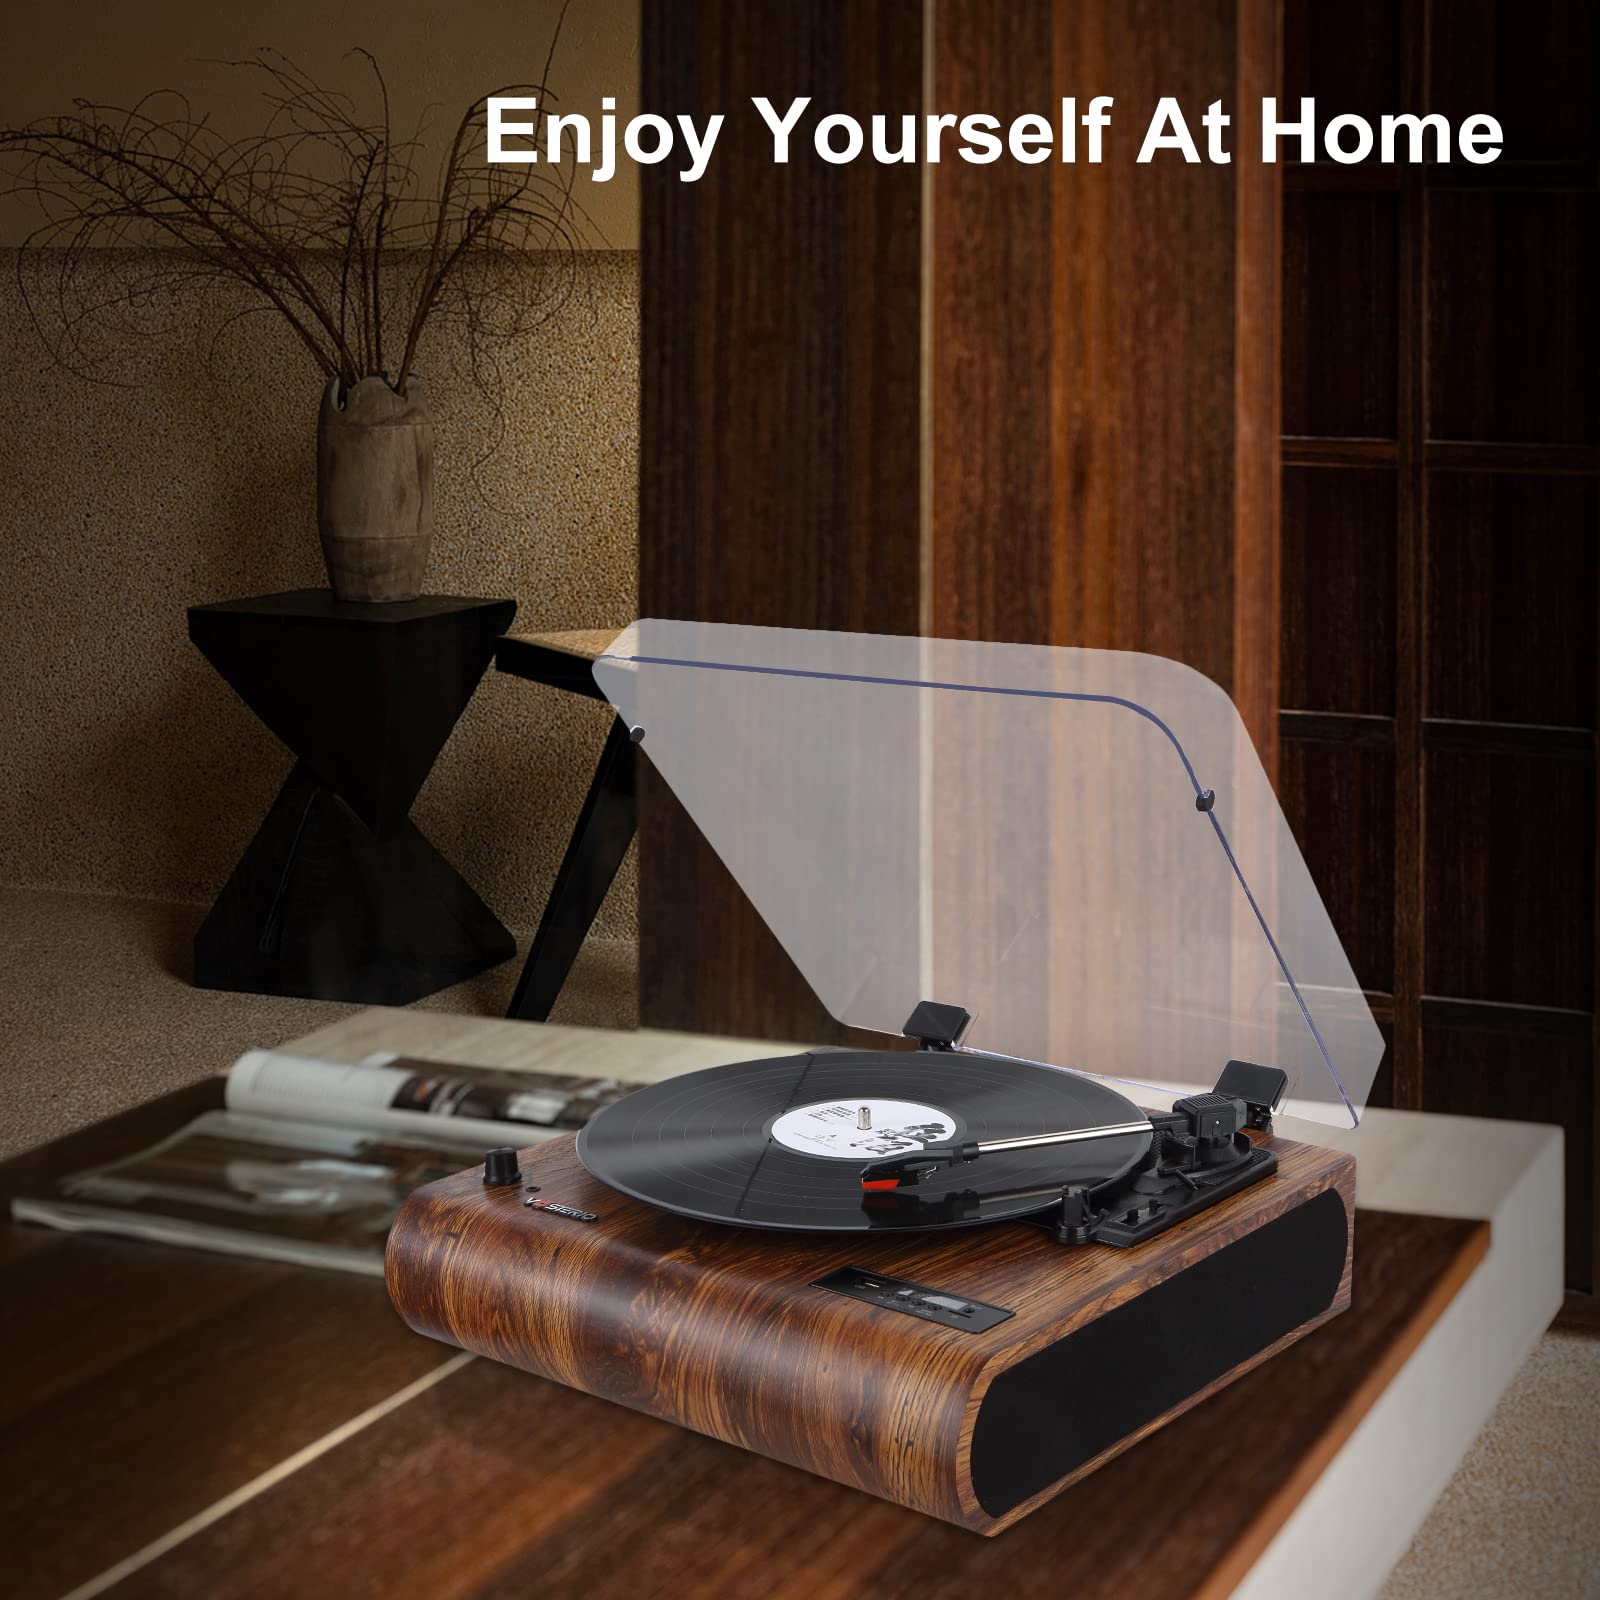 VOSTERIO Bluetooth Record Player, 3 Speed Turntable with Built-in Speakers, Retro LP Vinyl Player with BT Input & Output, FM Radio, USB & SD Card Recording, Aux in, LED Display